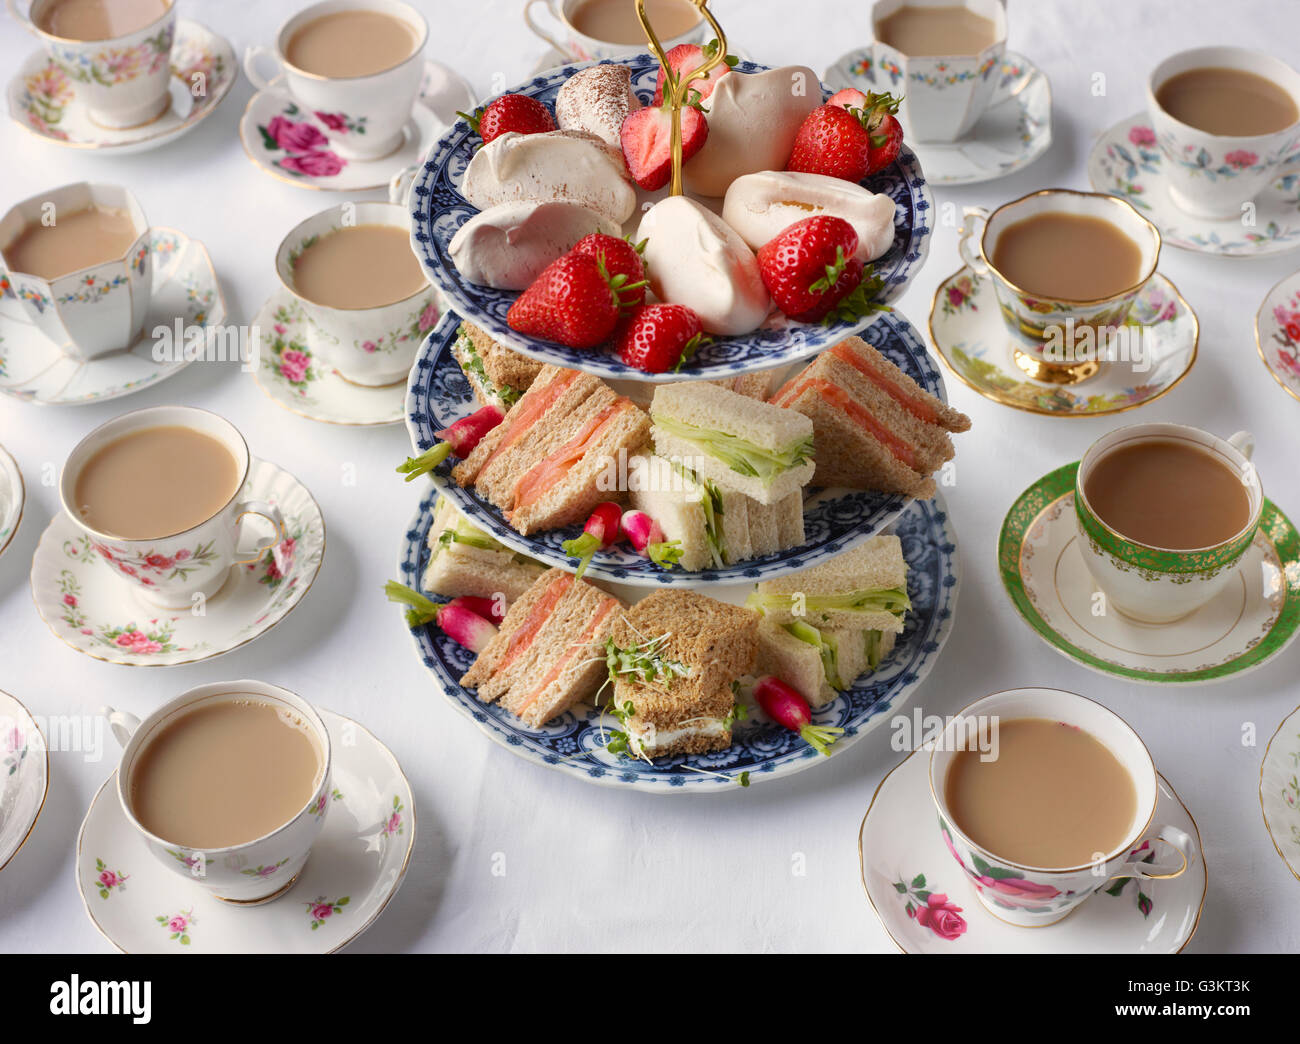 Vintage tea cups and sandwiches on cakestand prepared for afternoon tea Stock Photo